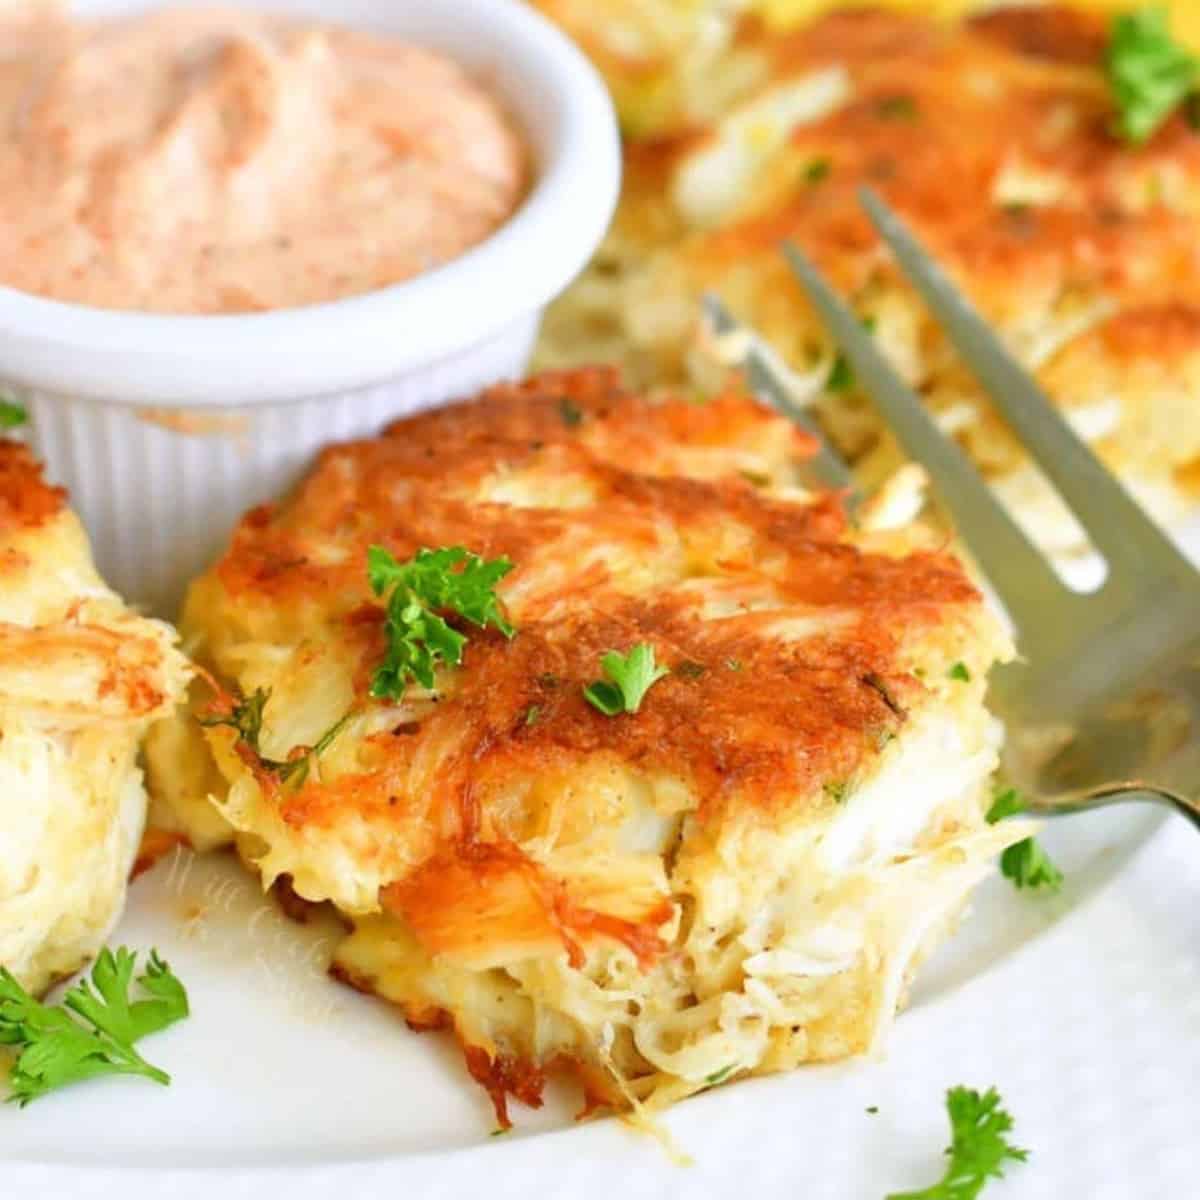 Maryland Style Crab Cakes with Spicy Remoulade